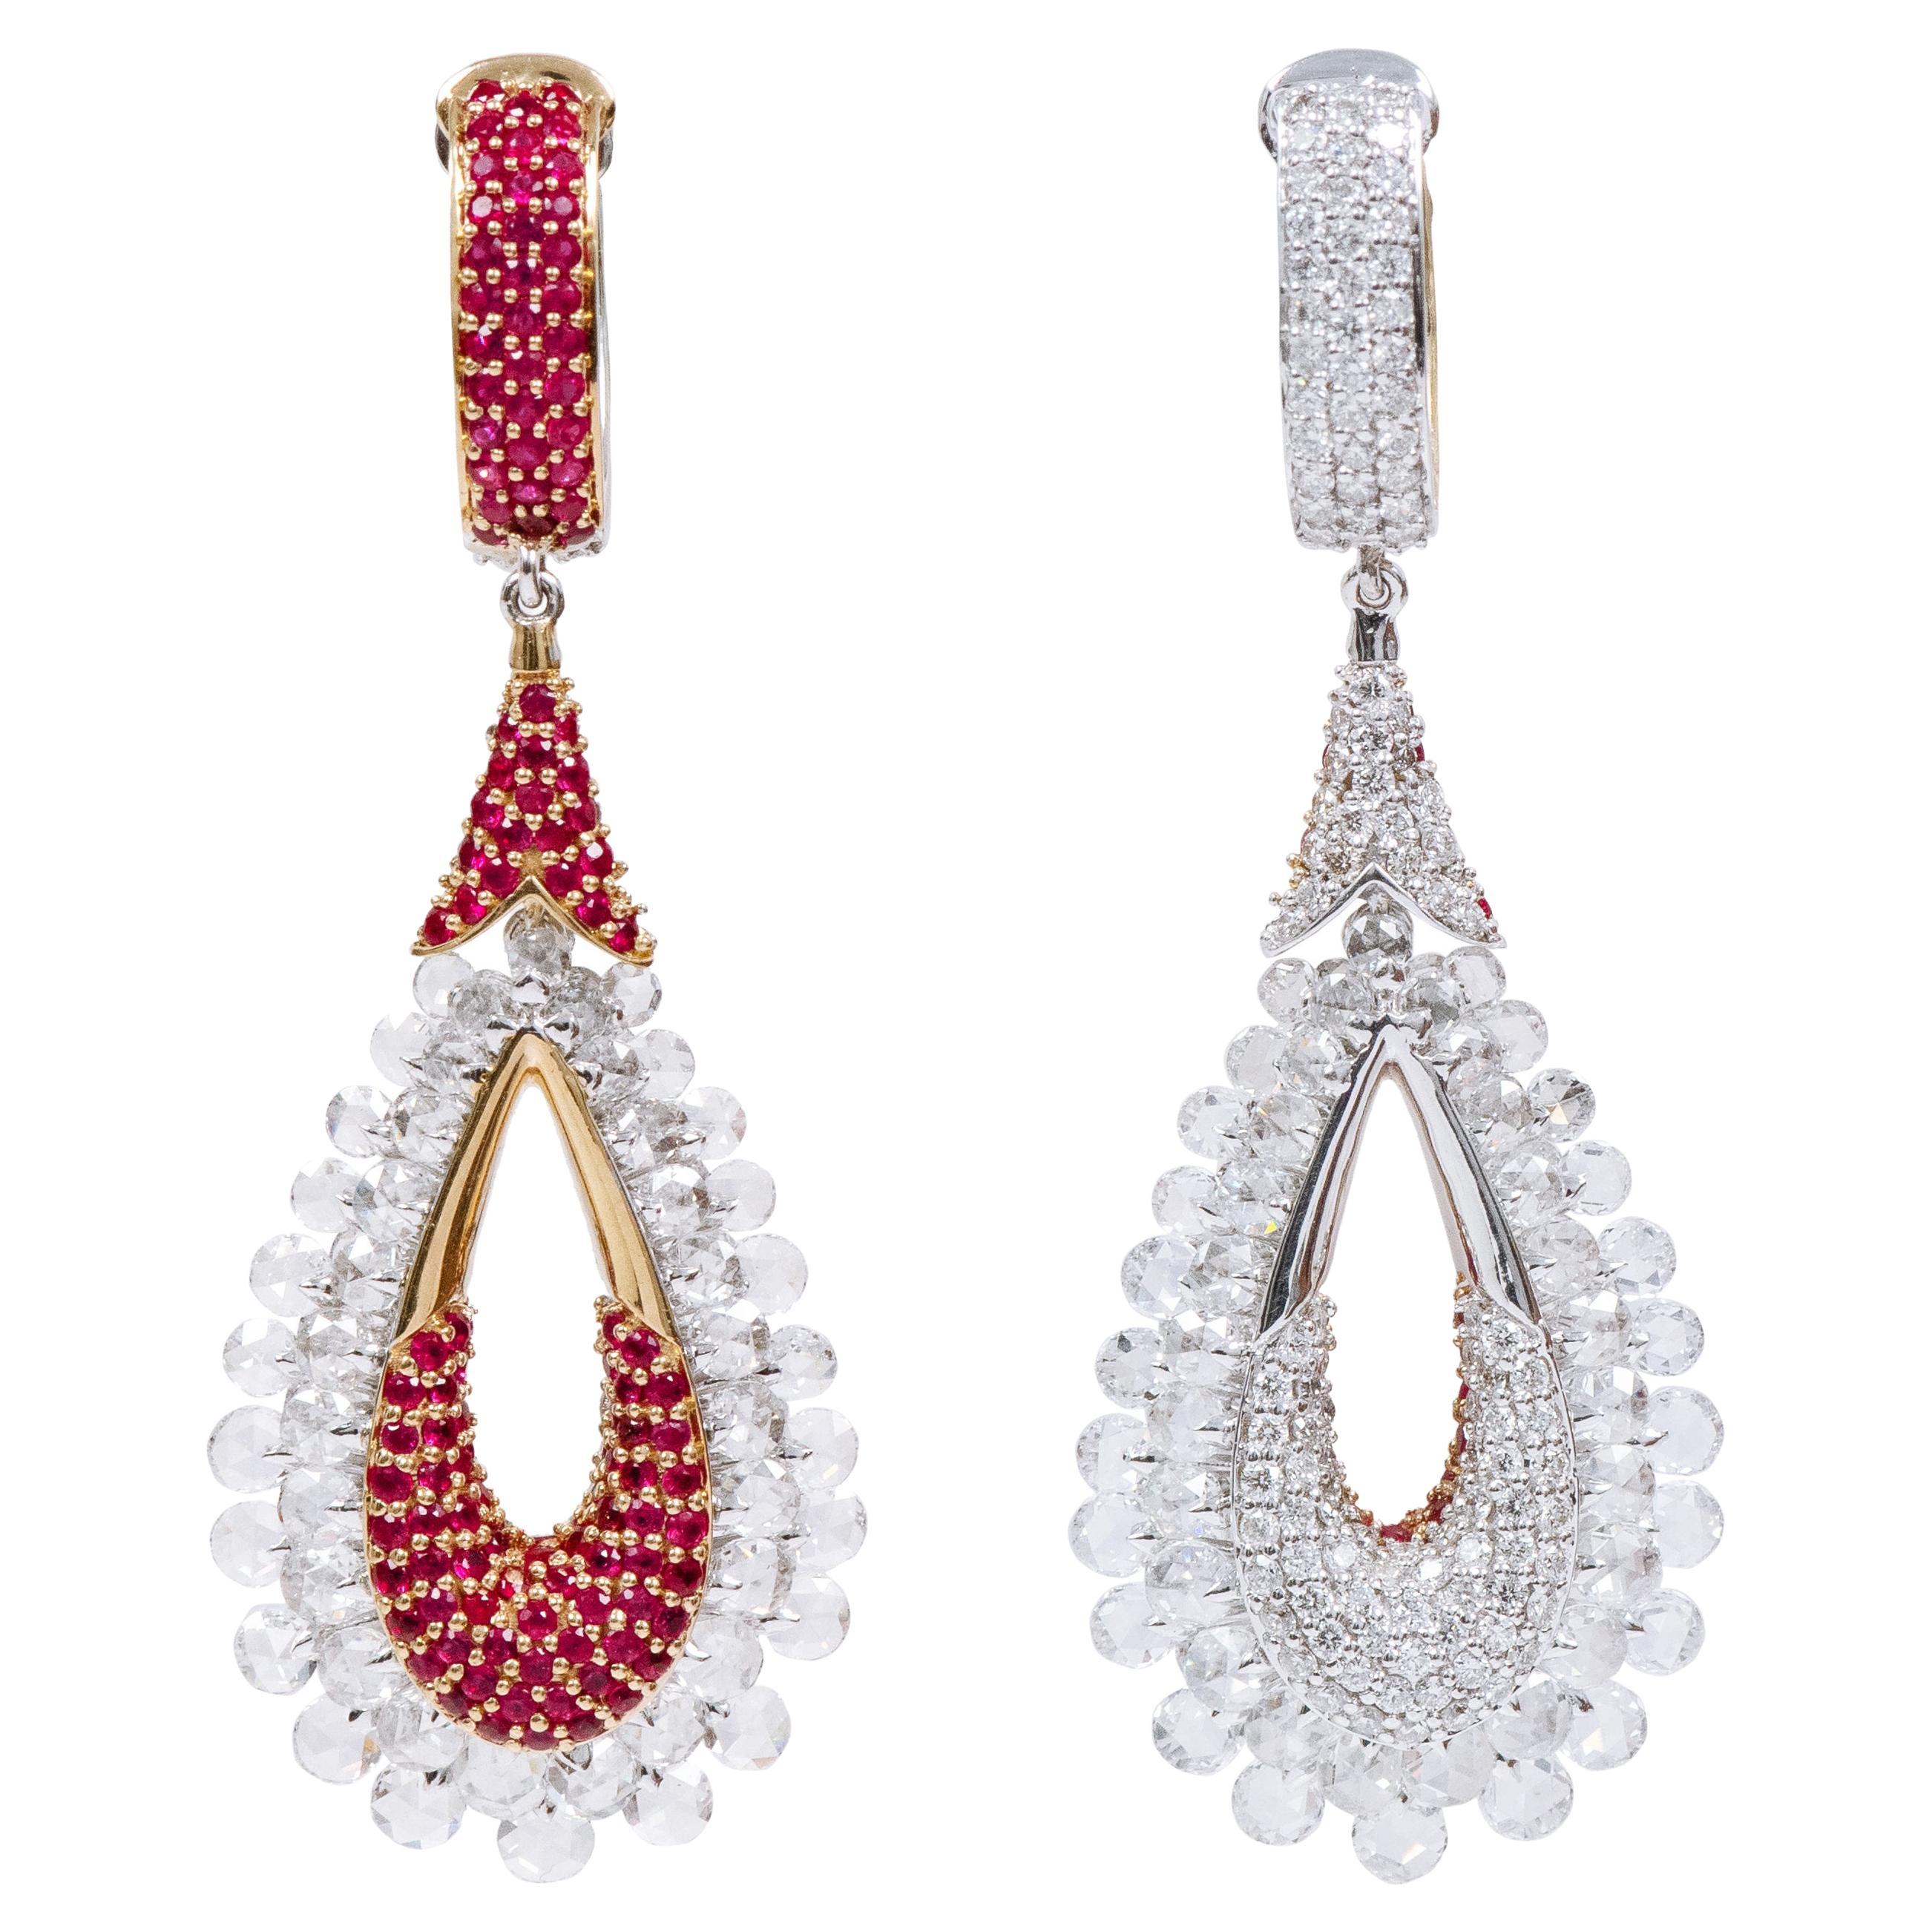 18 Karat Gold 8.51 Carats Diamond and Ruby Reversible Cocktail Earrings